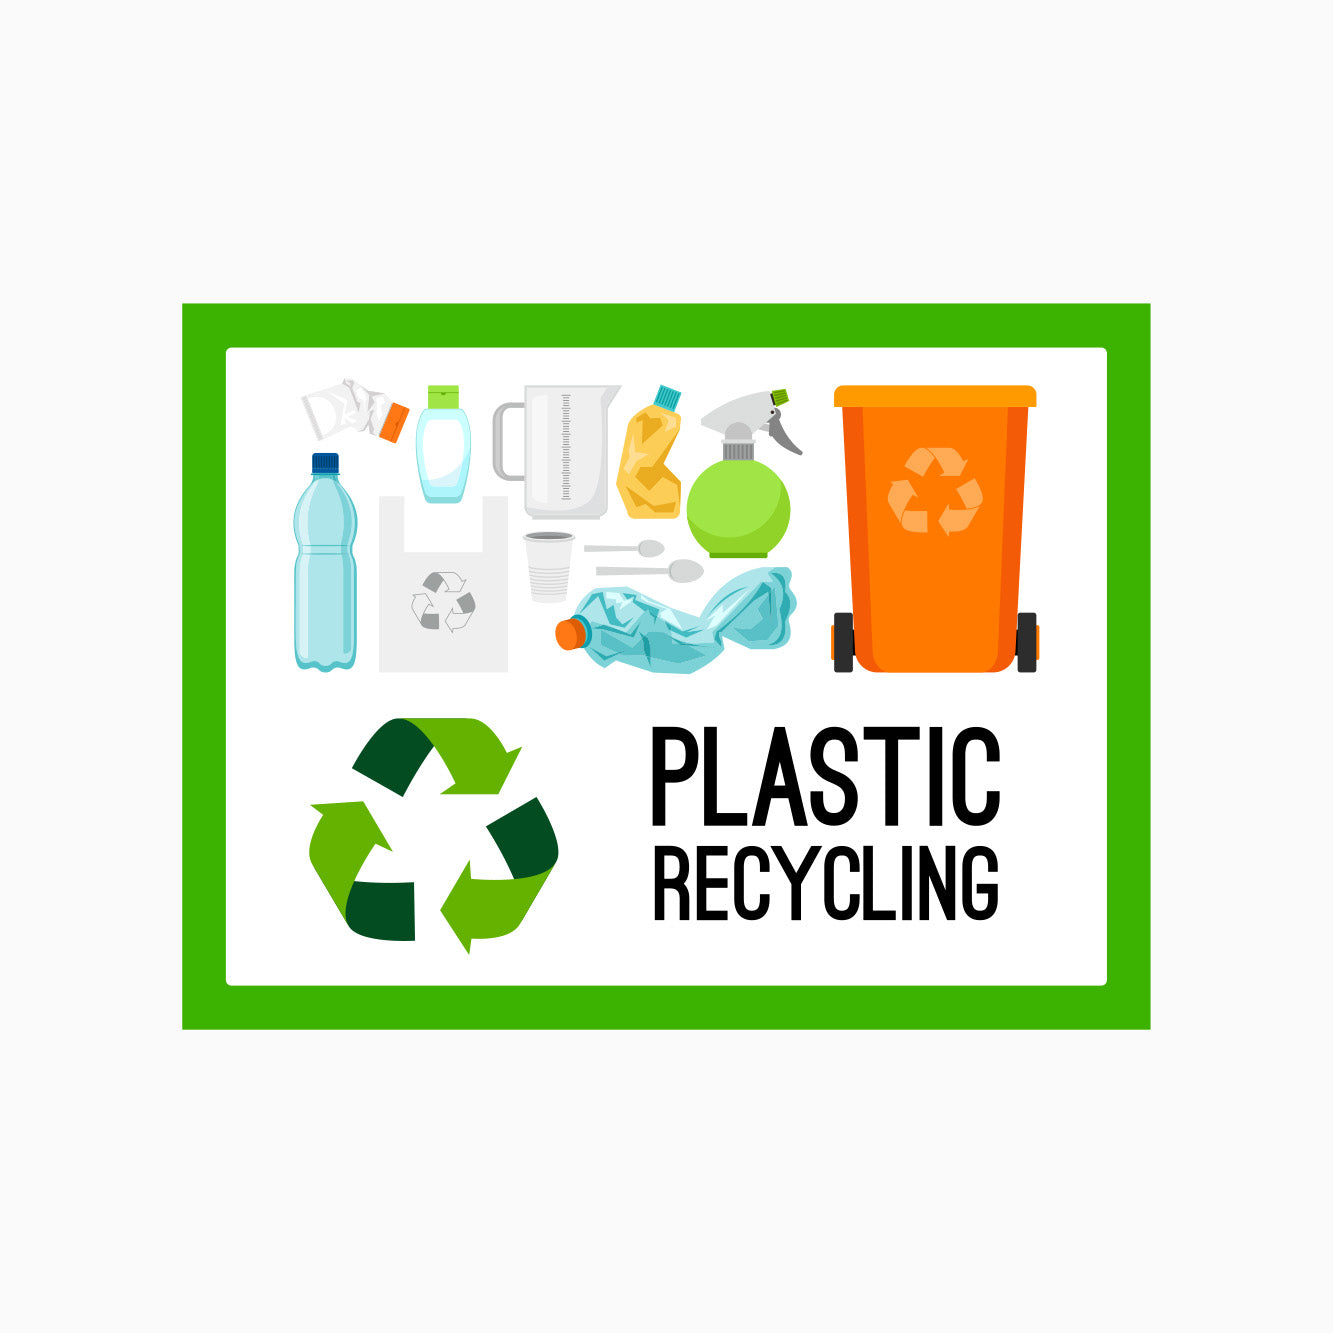 PLASTIC RECYCLING SIGN - high quality recycle signs